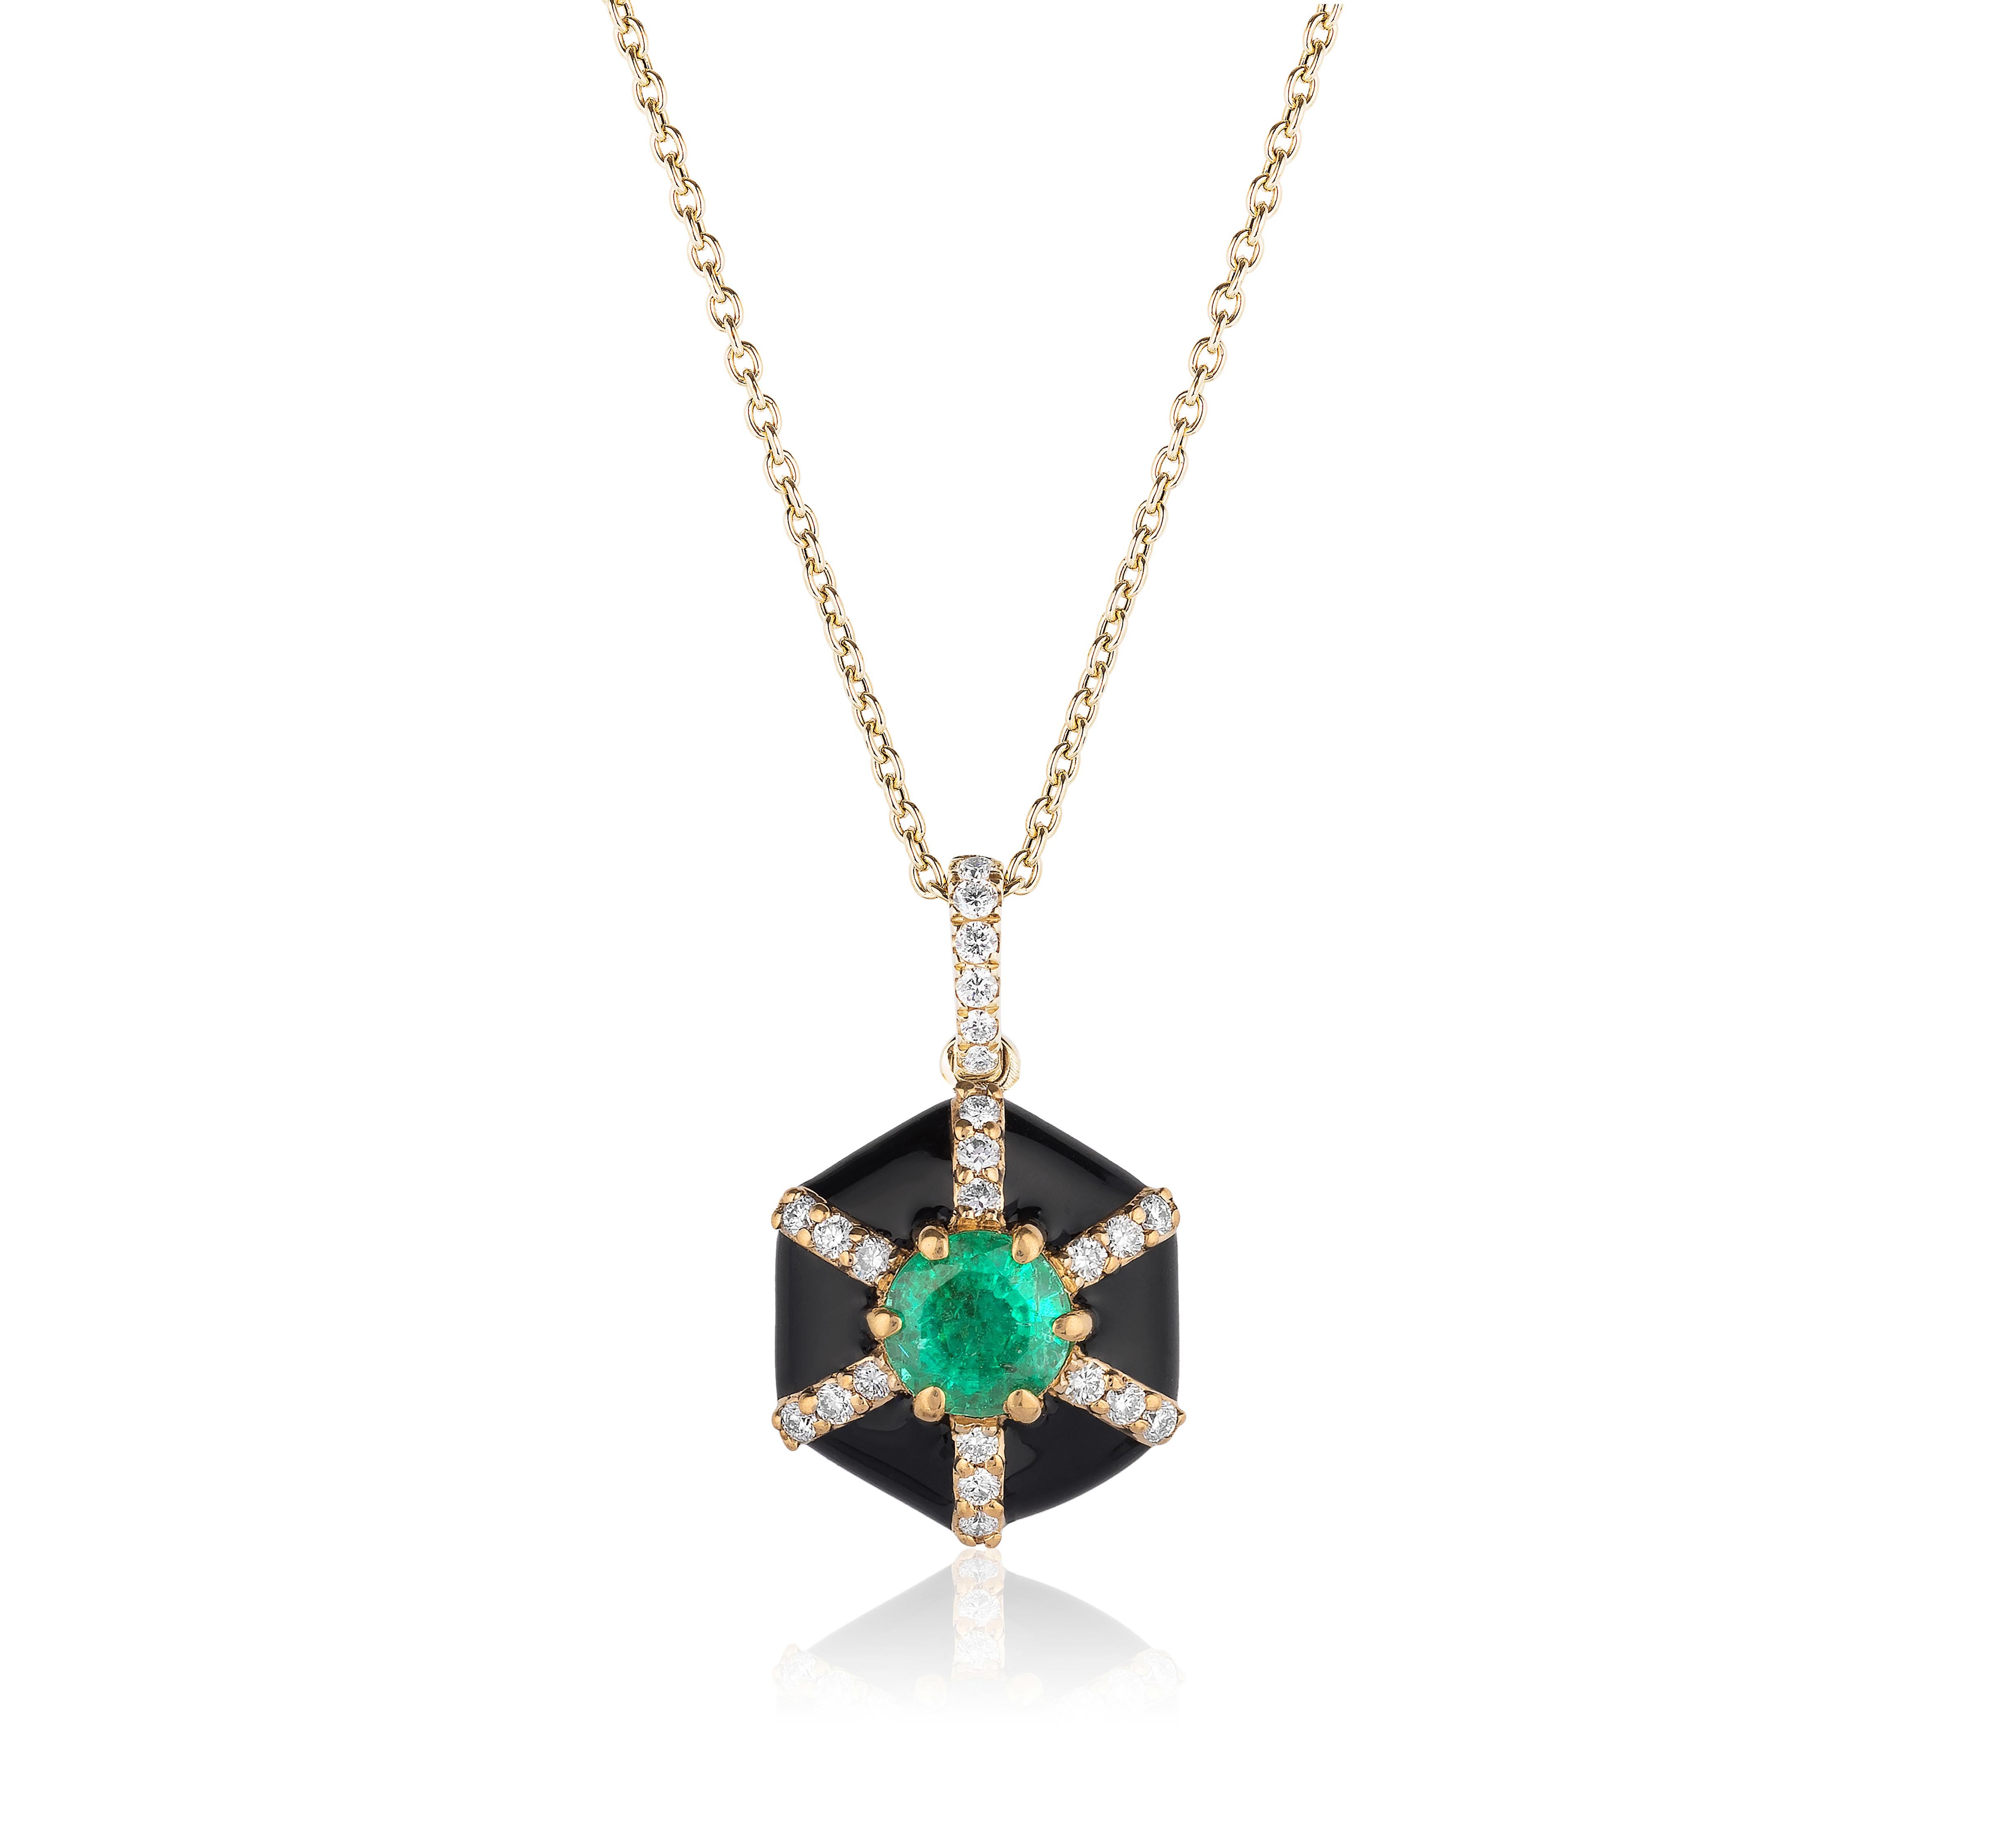 Hexagon Black Enamel Pendant with Emerald and Diamonds in 18K Yellow Gold. from ‘Queen’ Collection

Stone Size: 4 mm

Diamonds: G-H / VS, Approx. Wt: 0.10 Carats 